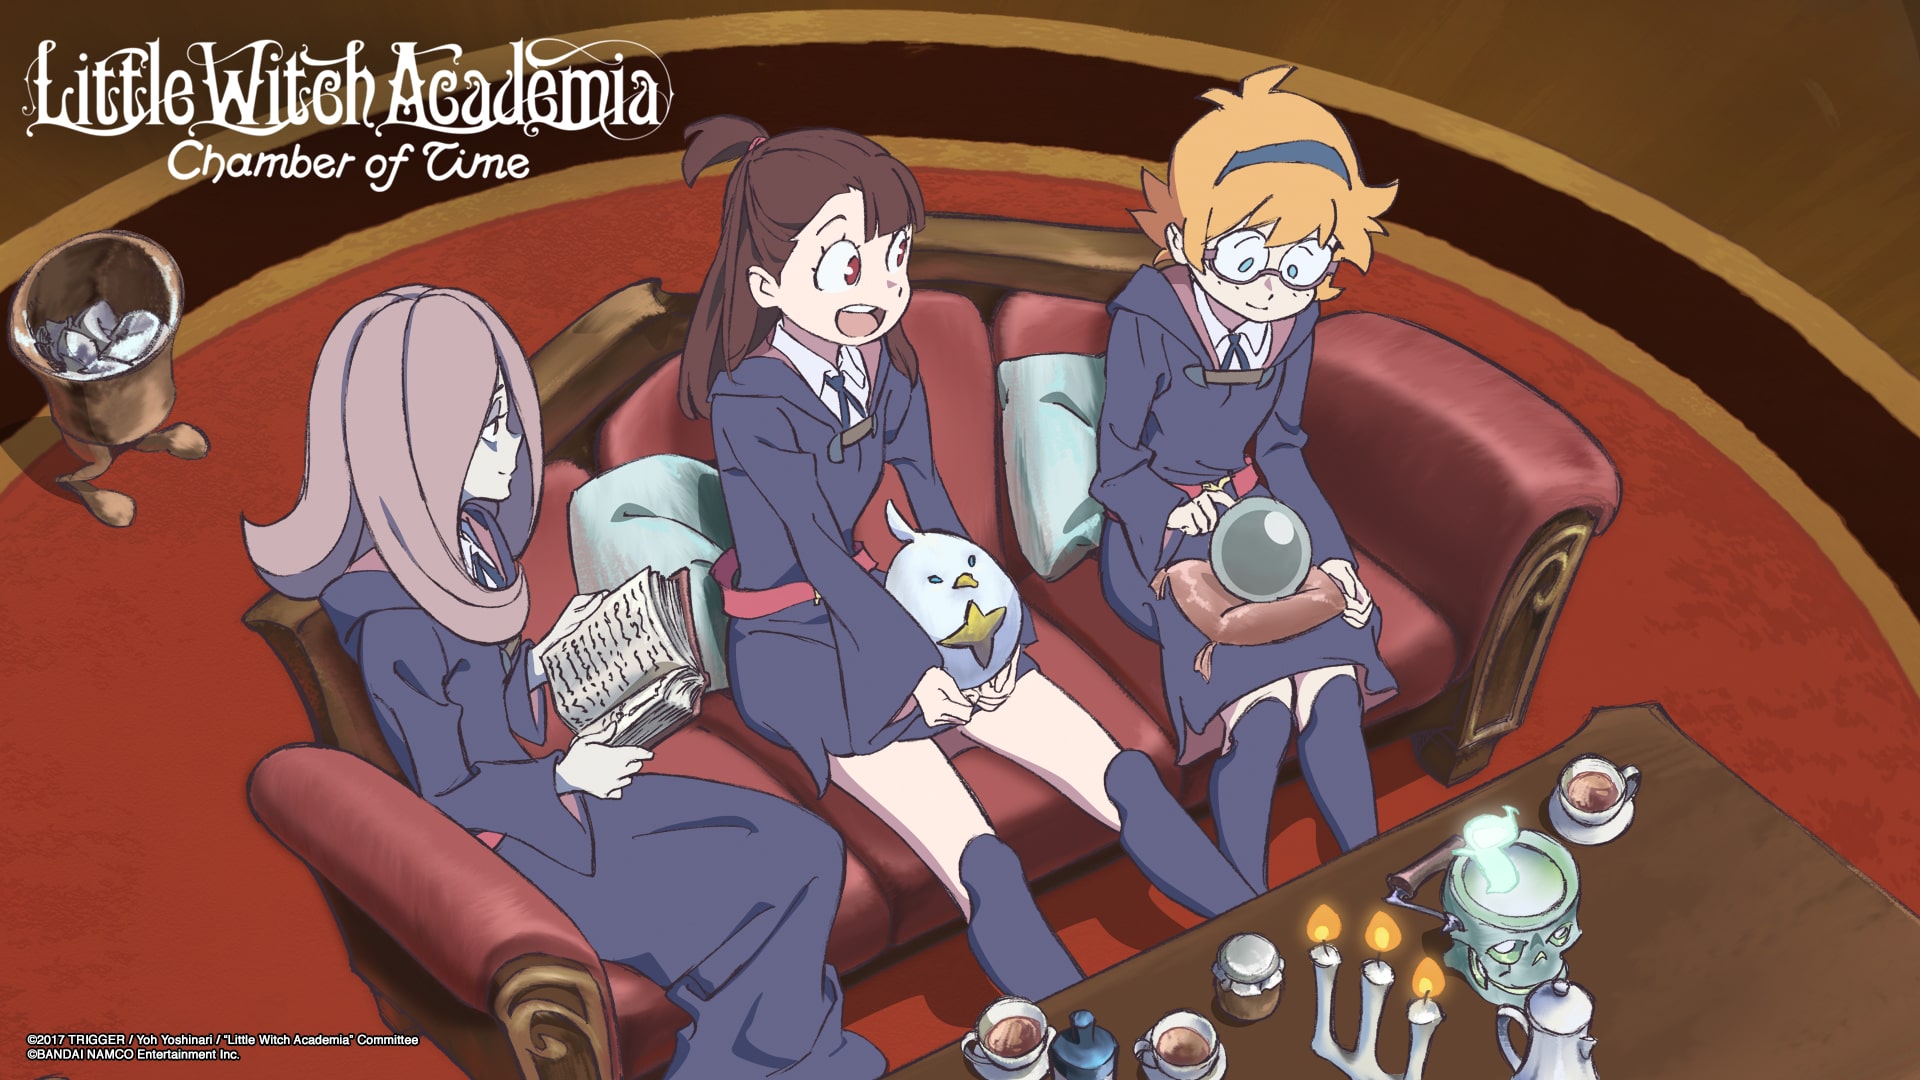 Little Witch Academia: Chamber of Time (English)